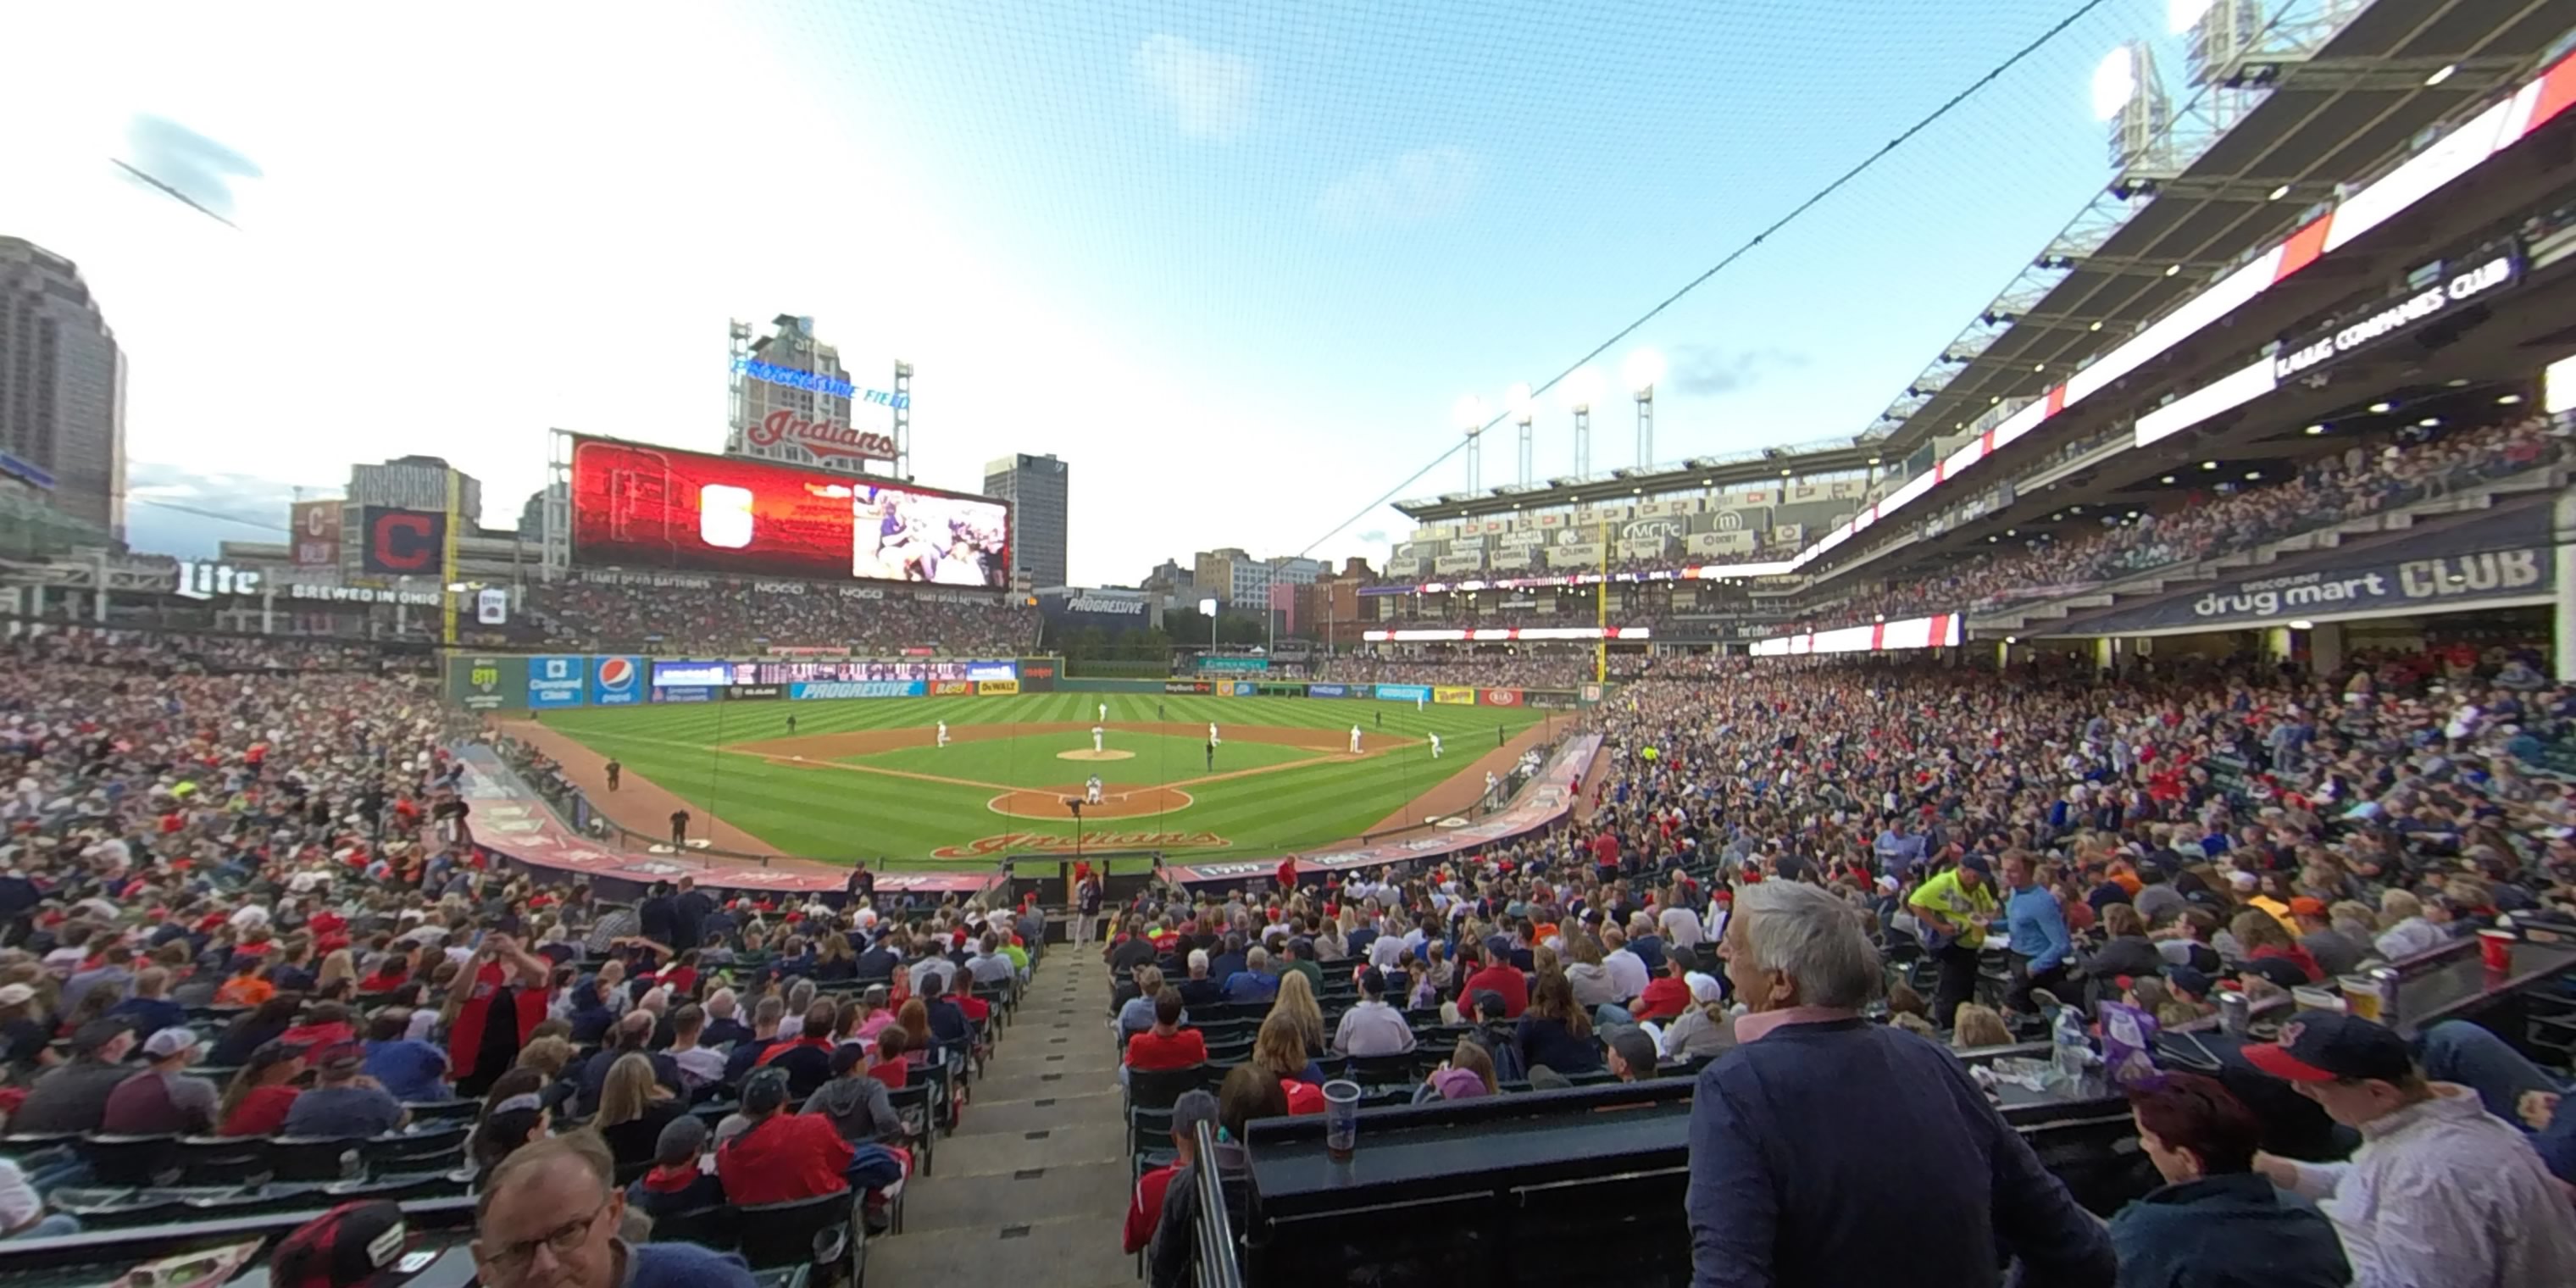 section 153 panoramic seat view  - progressive field